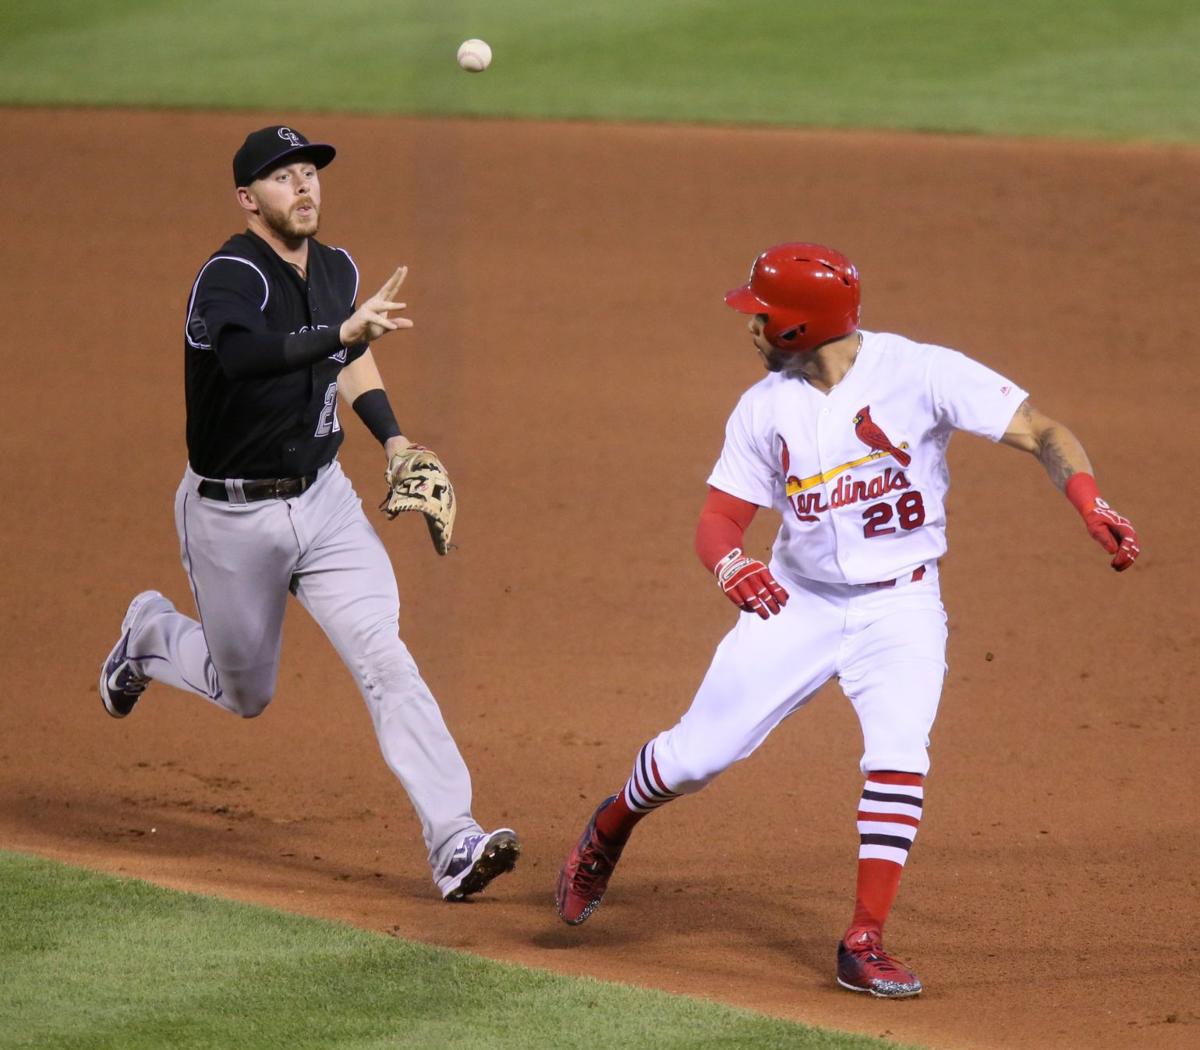 Cards sweep series with 105 win over Rockies St. Louis Cardinals